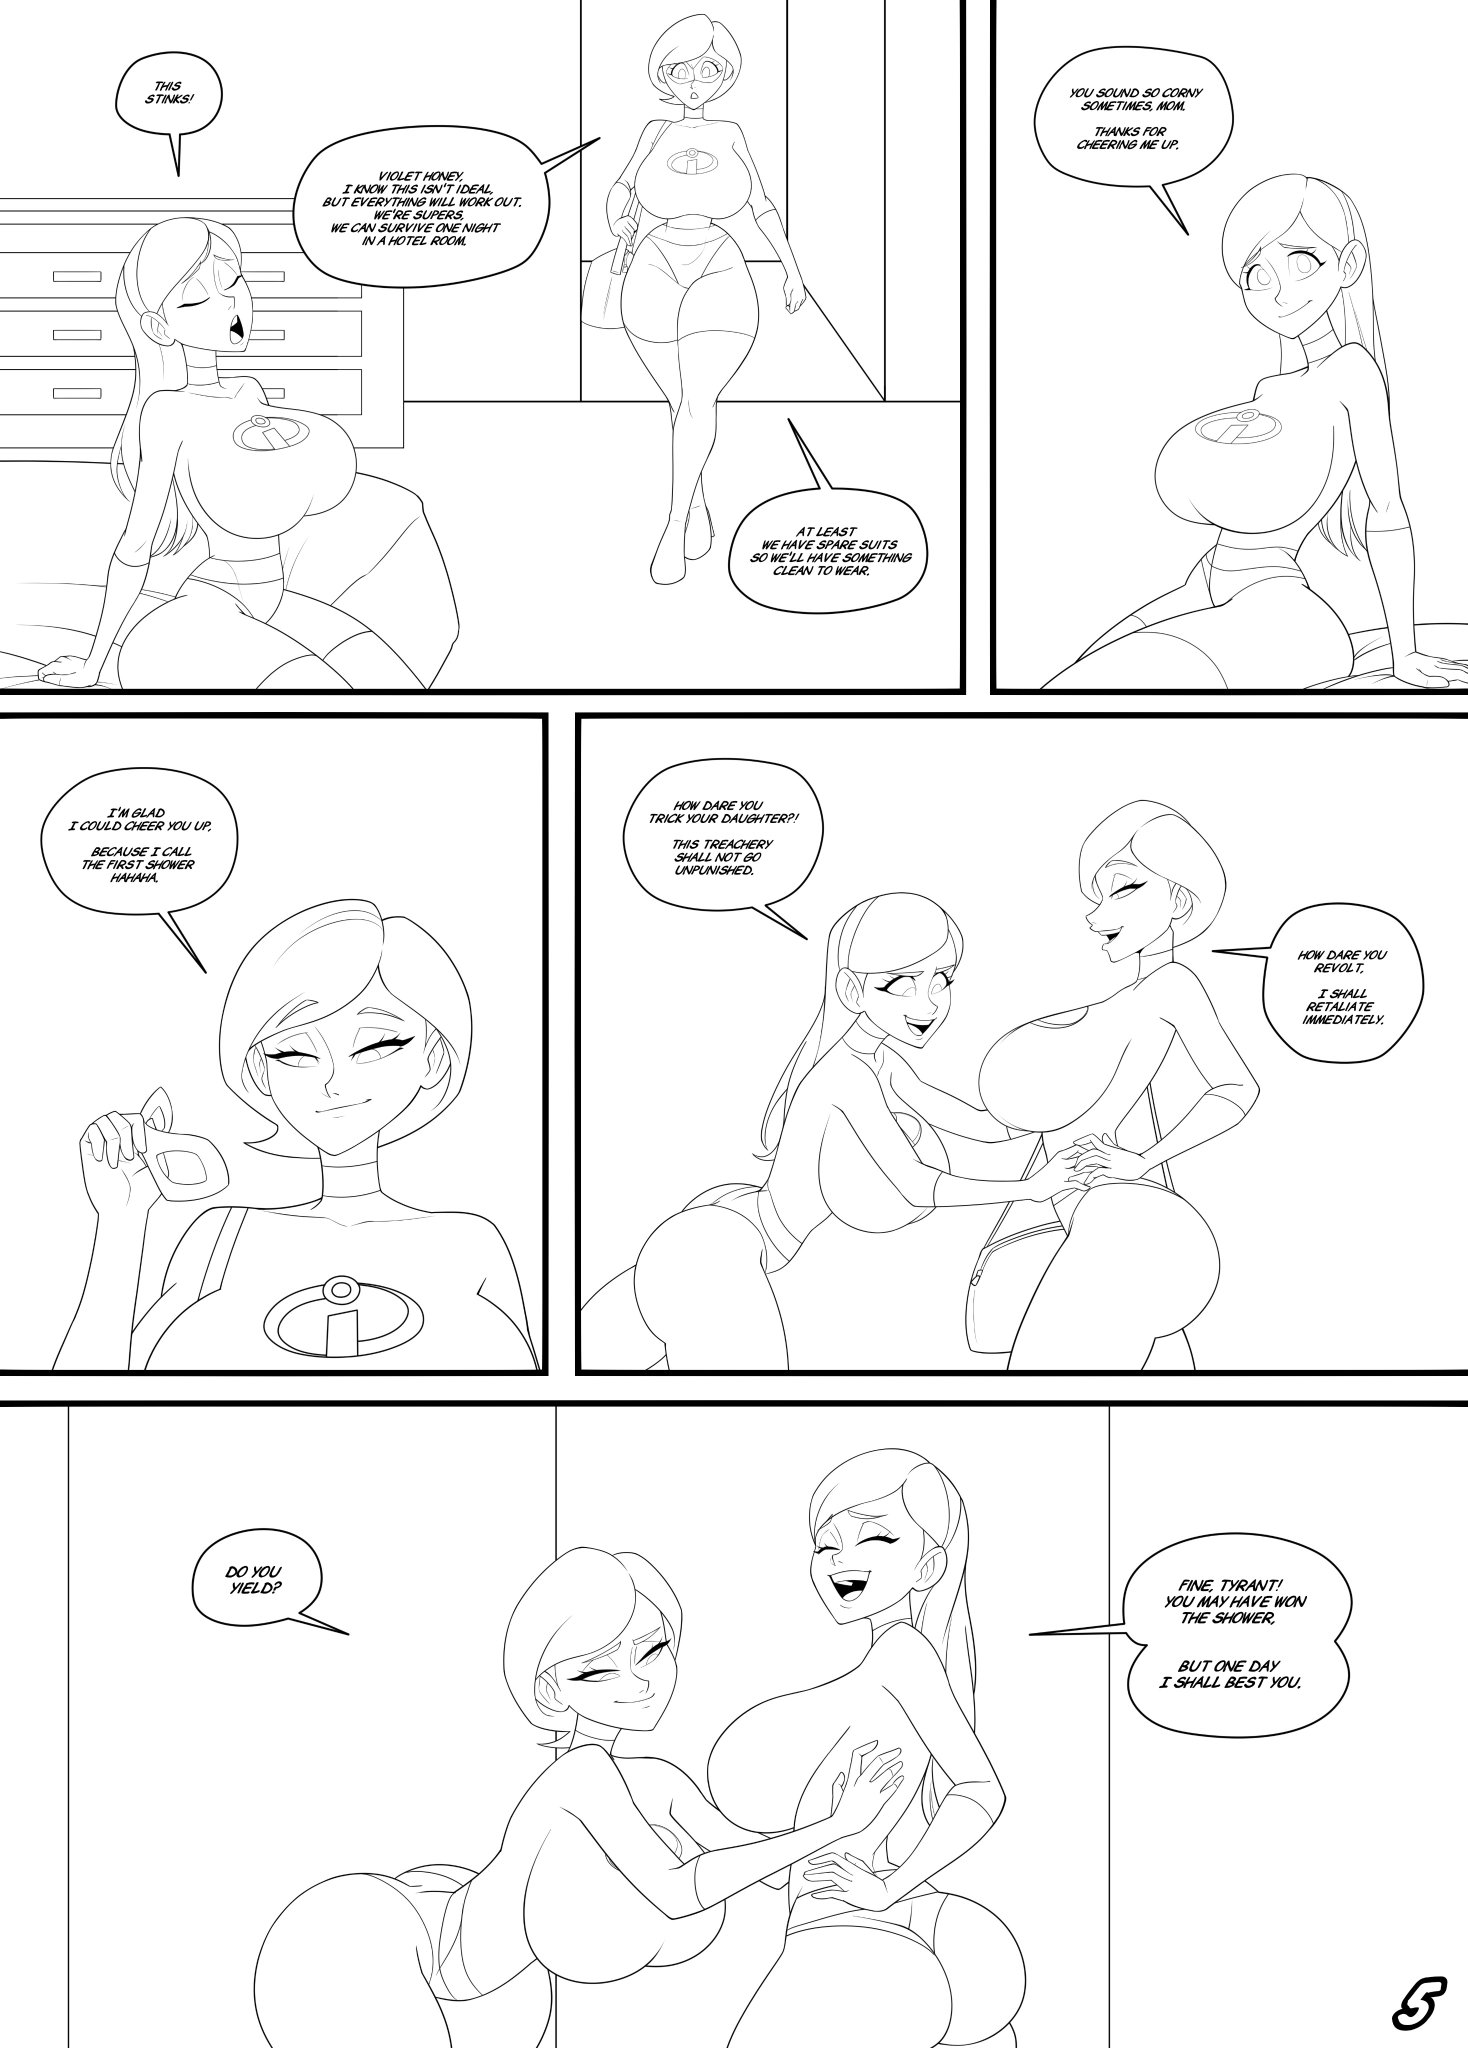 Incestibles: Helen's Stretchy Situation pg 5